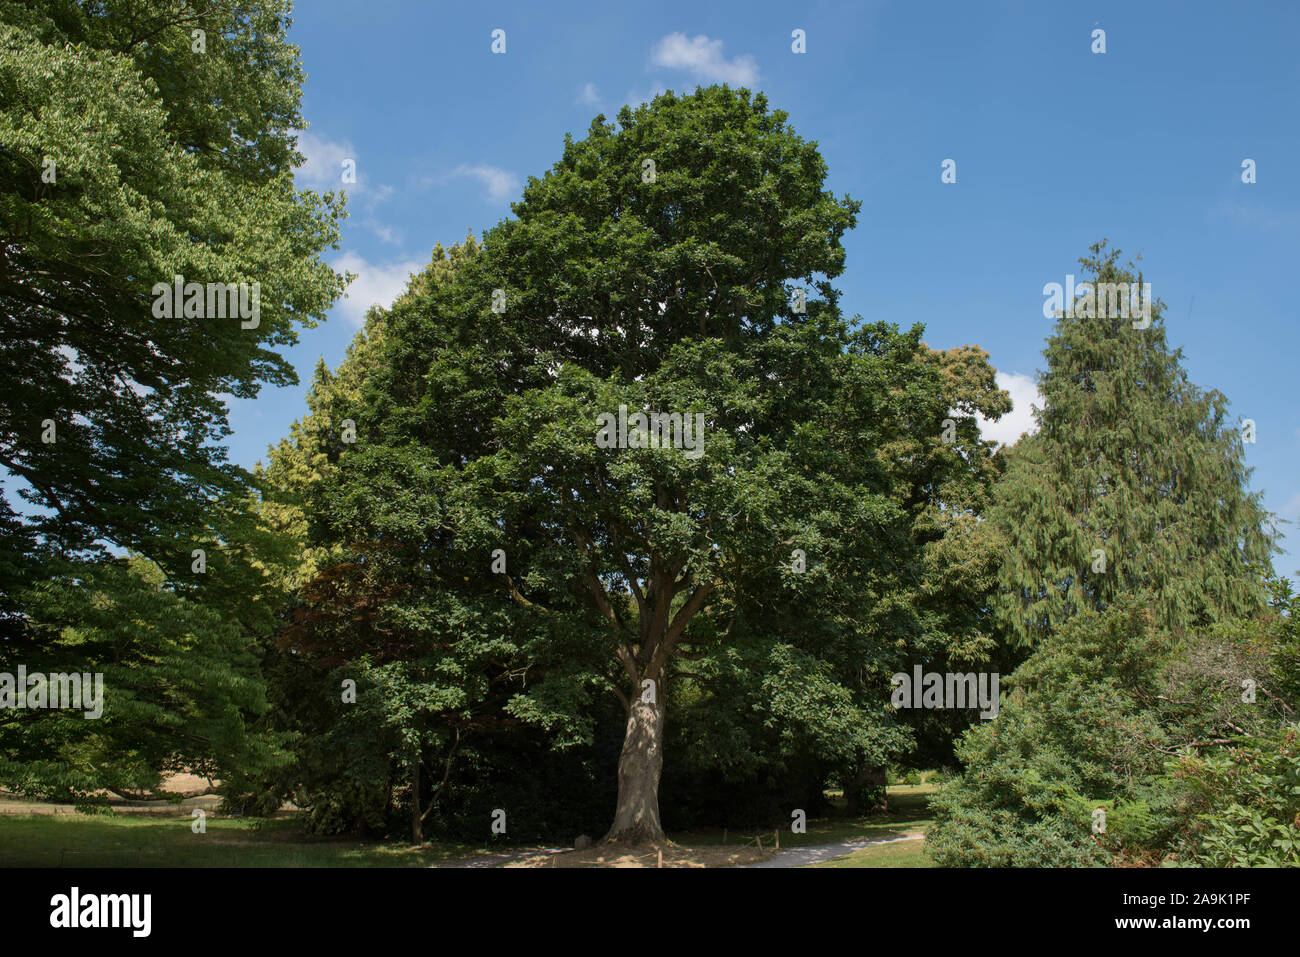 Hybrid Keble Oak Tree (Quercus canariensis x robur), Cross between Algerian Oak and English Ok Trees, in a Park with a Bright Blue Sky Background Stock Photo